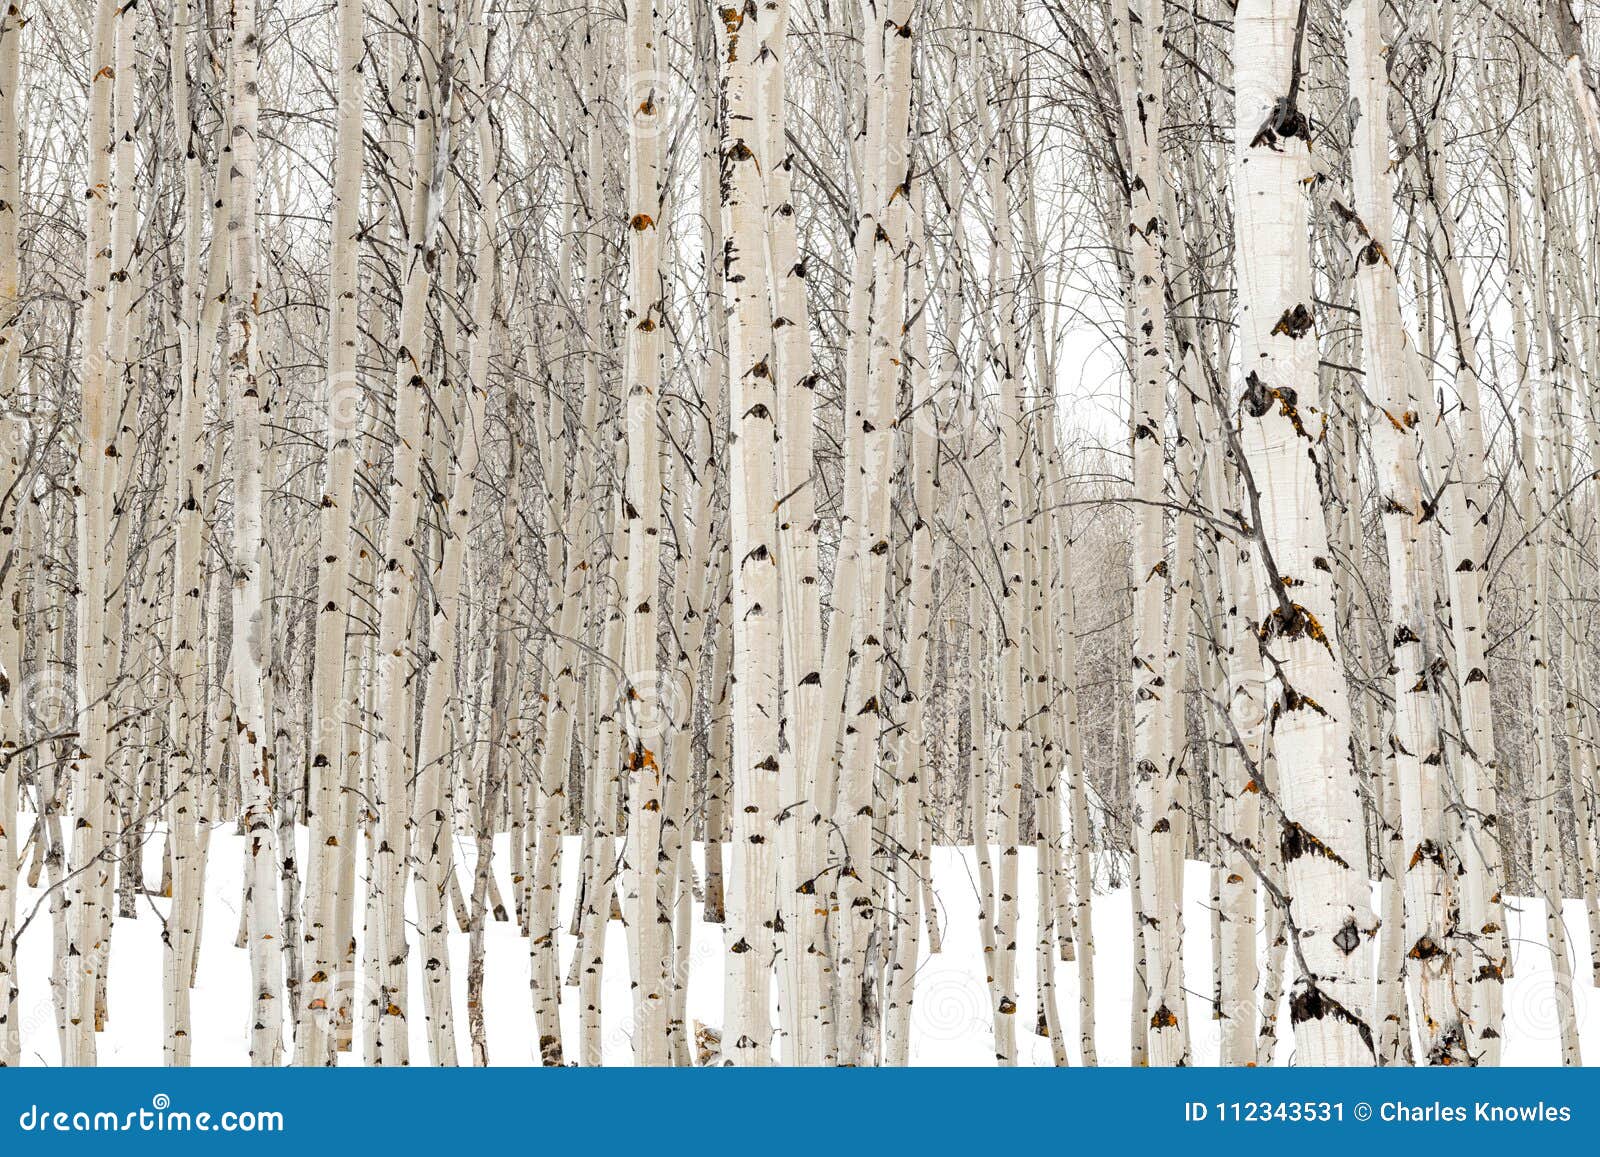 aspen trees in winter with water soaked bark